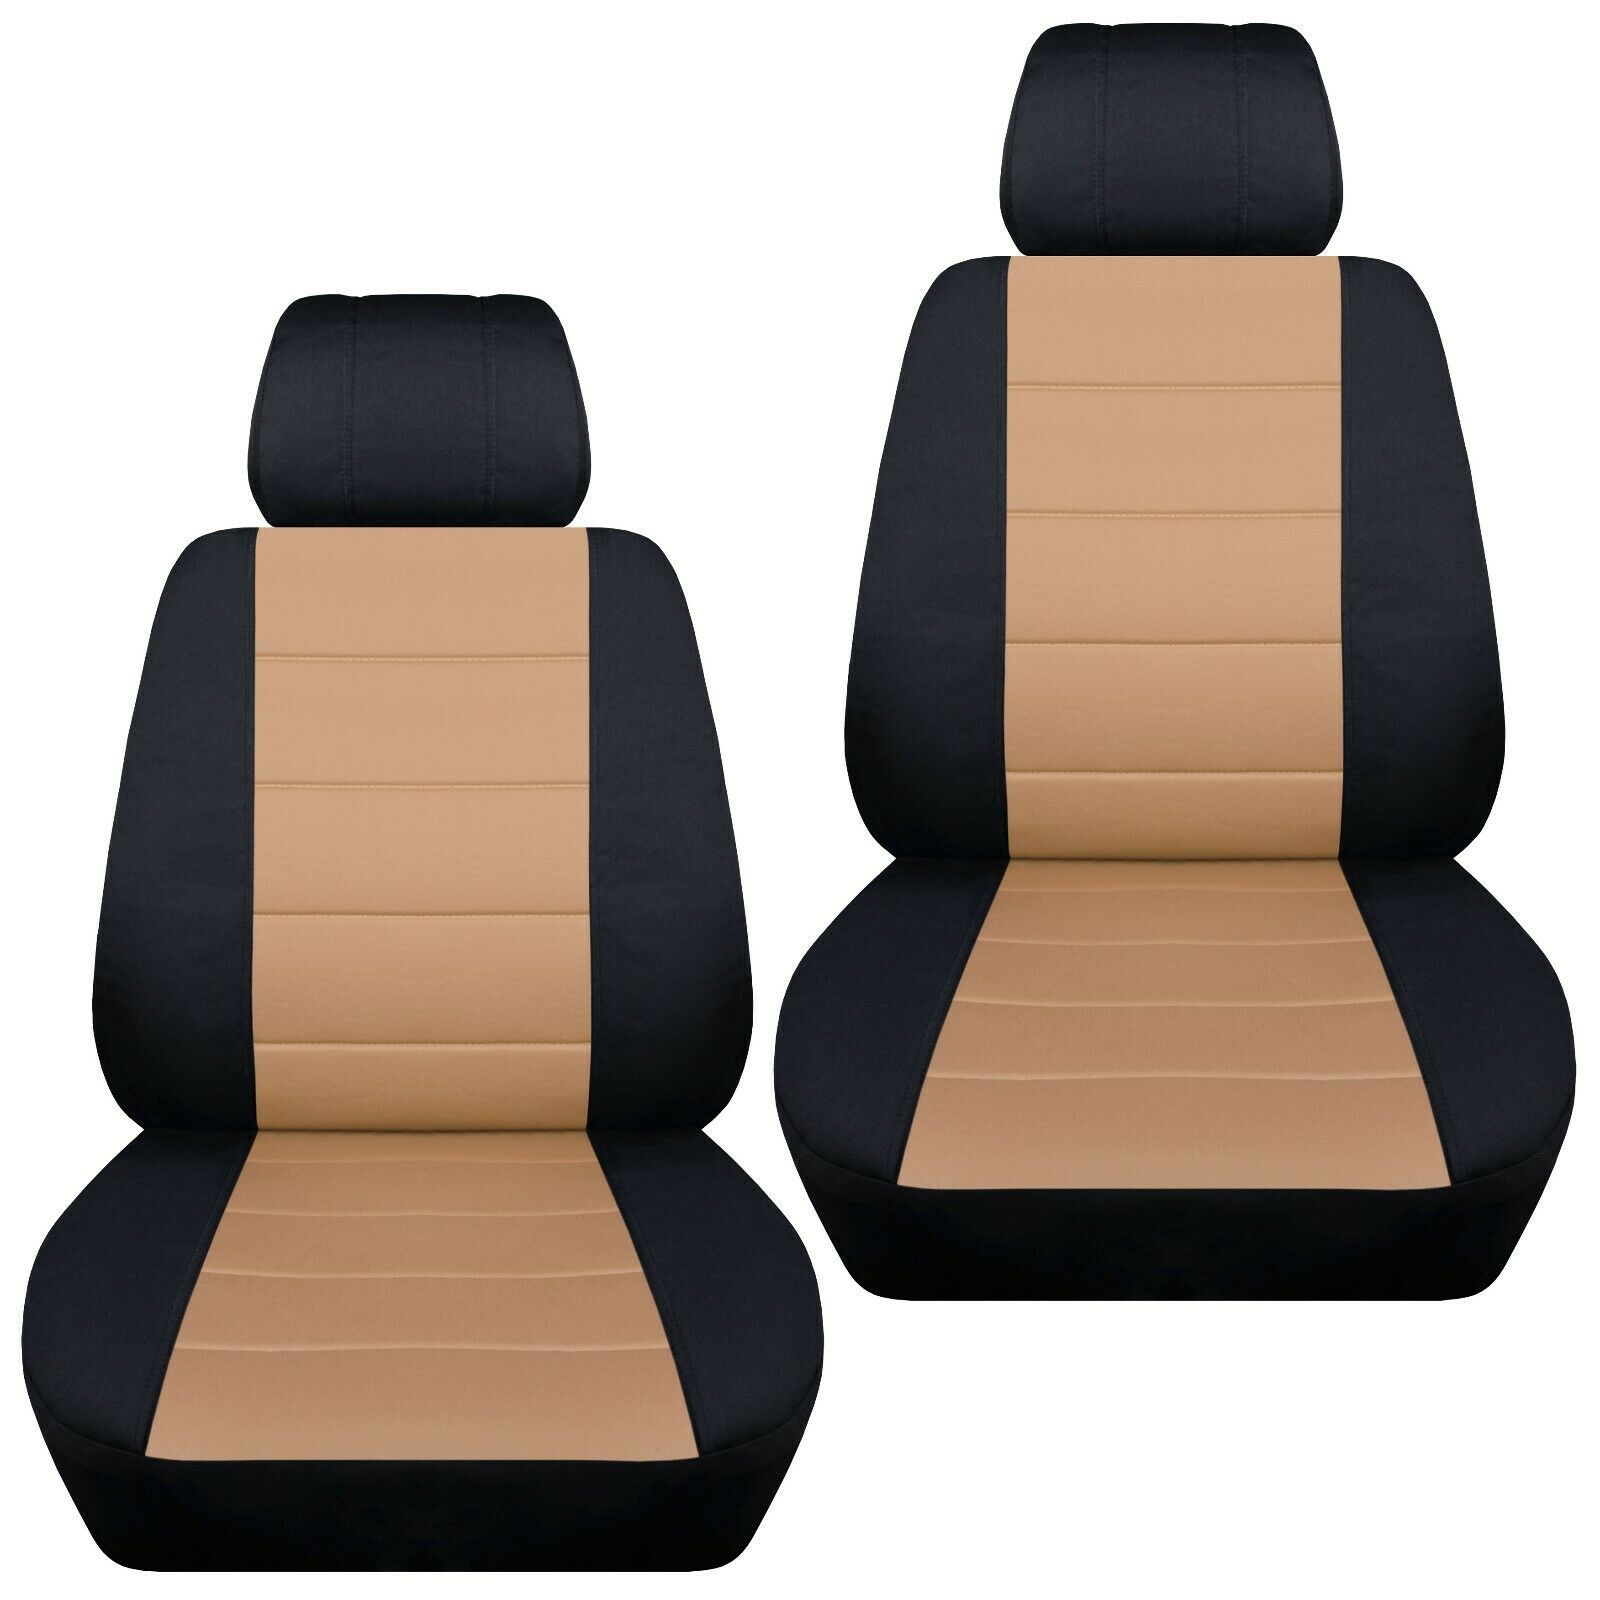 Car Seat Covers For 2005 Chevy Equinox